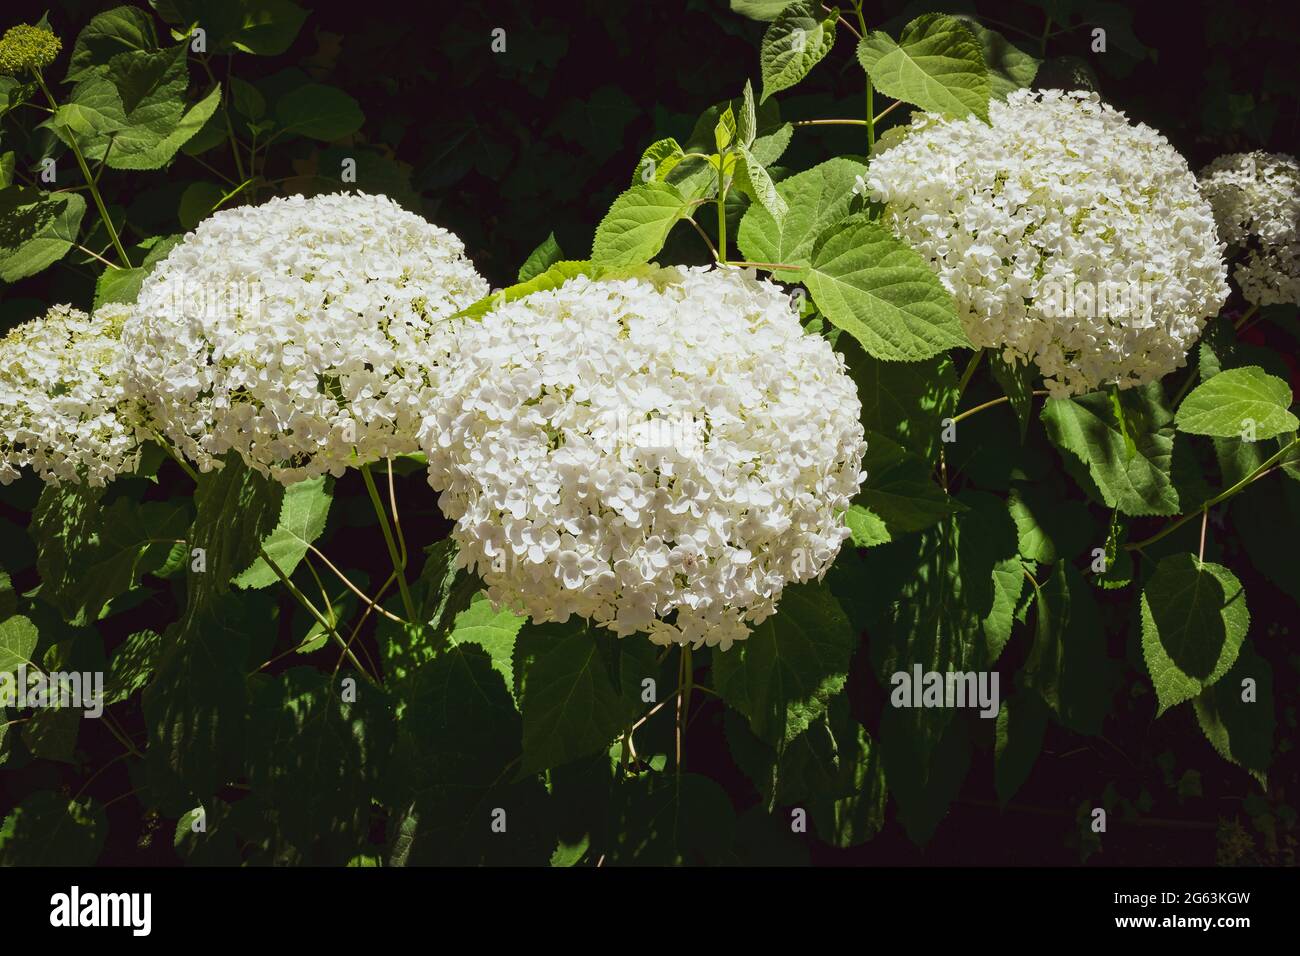 Closeup of a splendid white hydrangea plant, symbol of love, with its characteristic flowers. Stock Photo